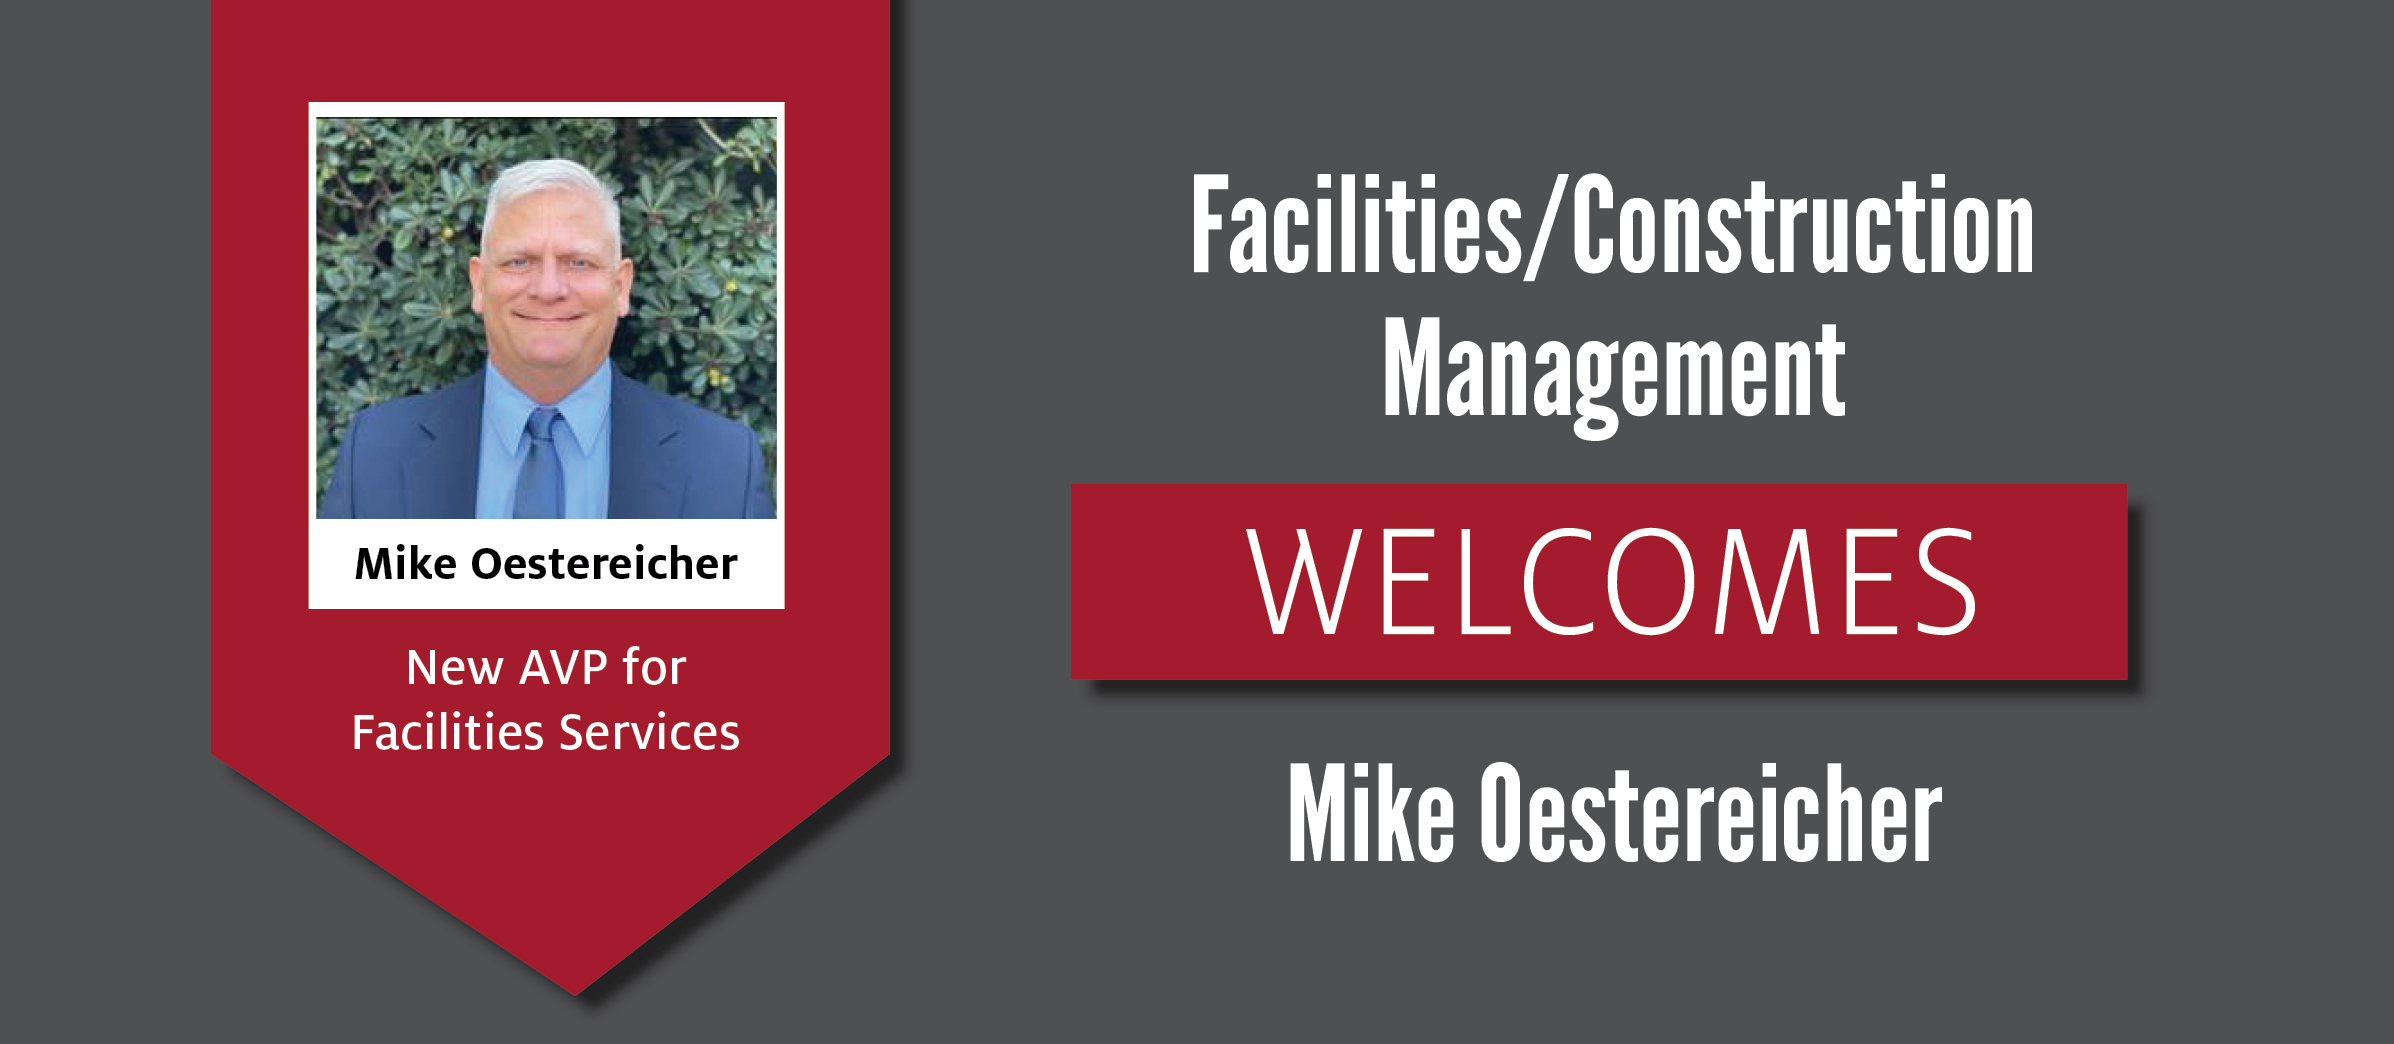 Facilities/Construction Management welcomes Mike Oestereicher